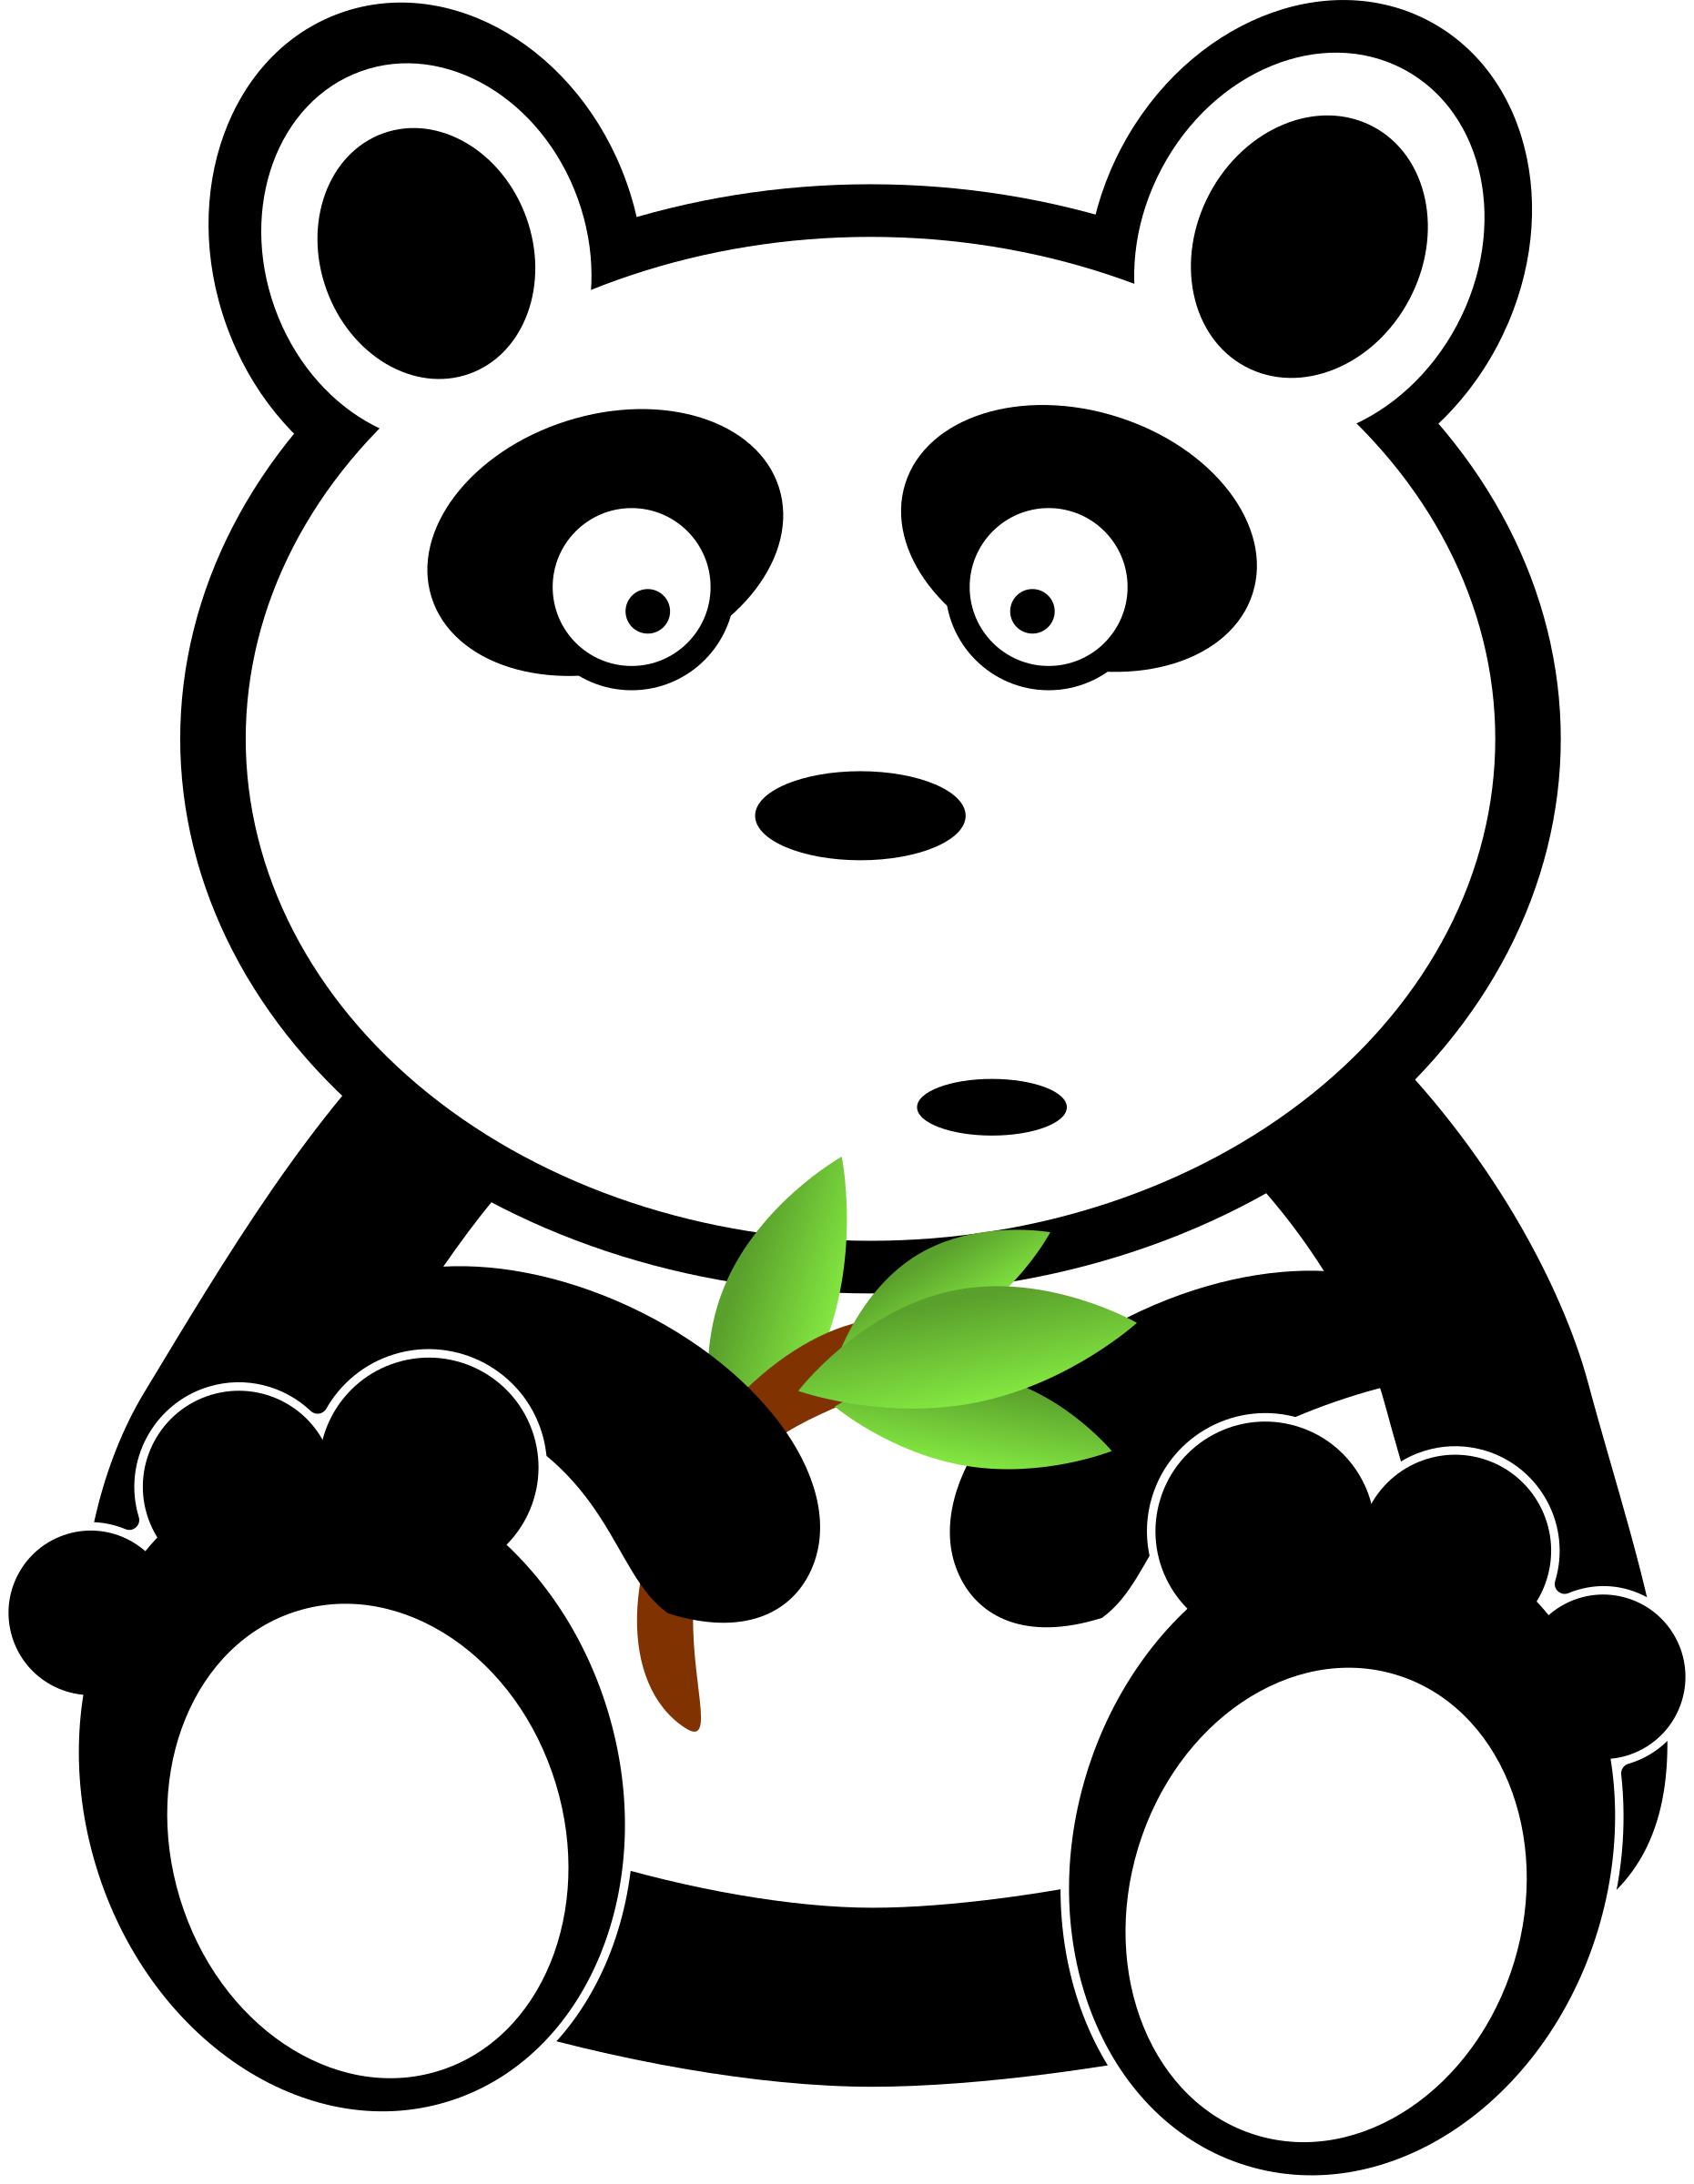 Panda with bamboo leaves PNG icons